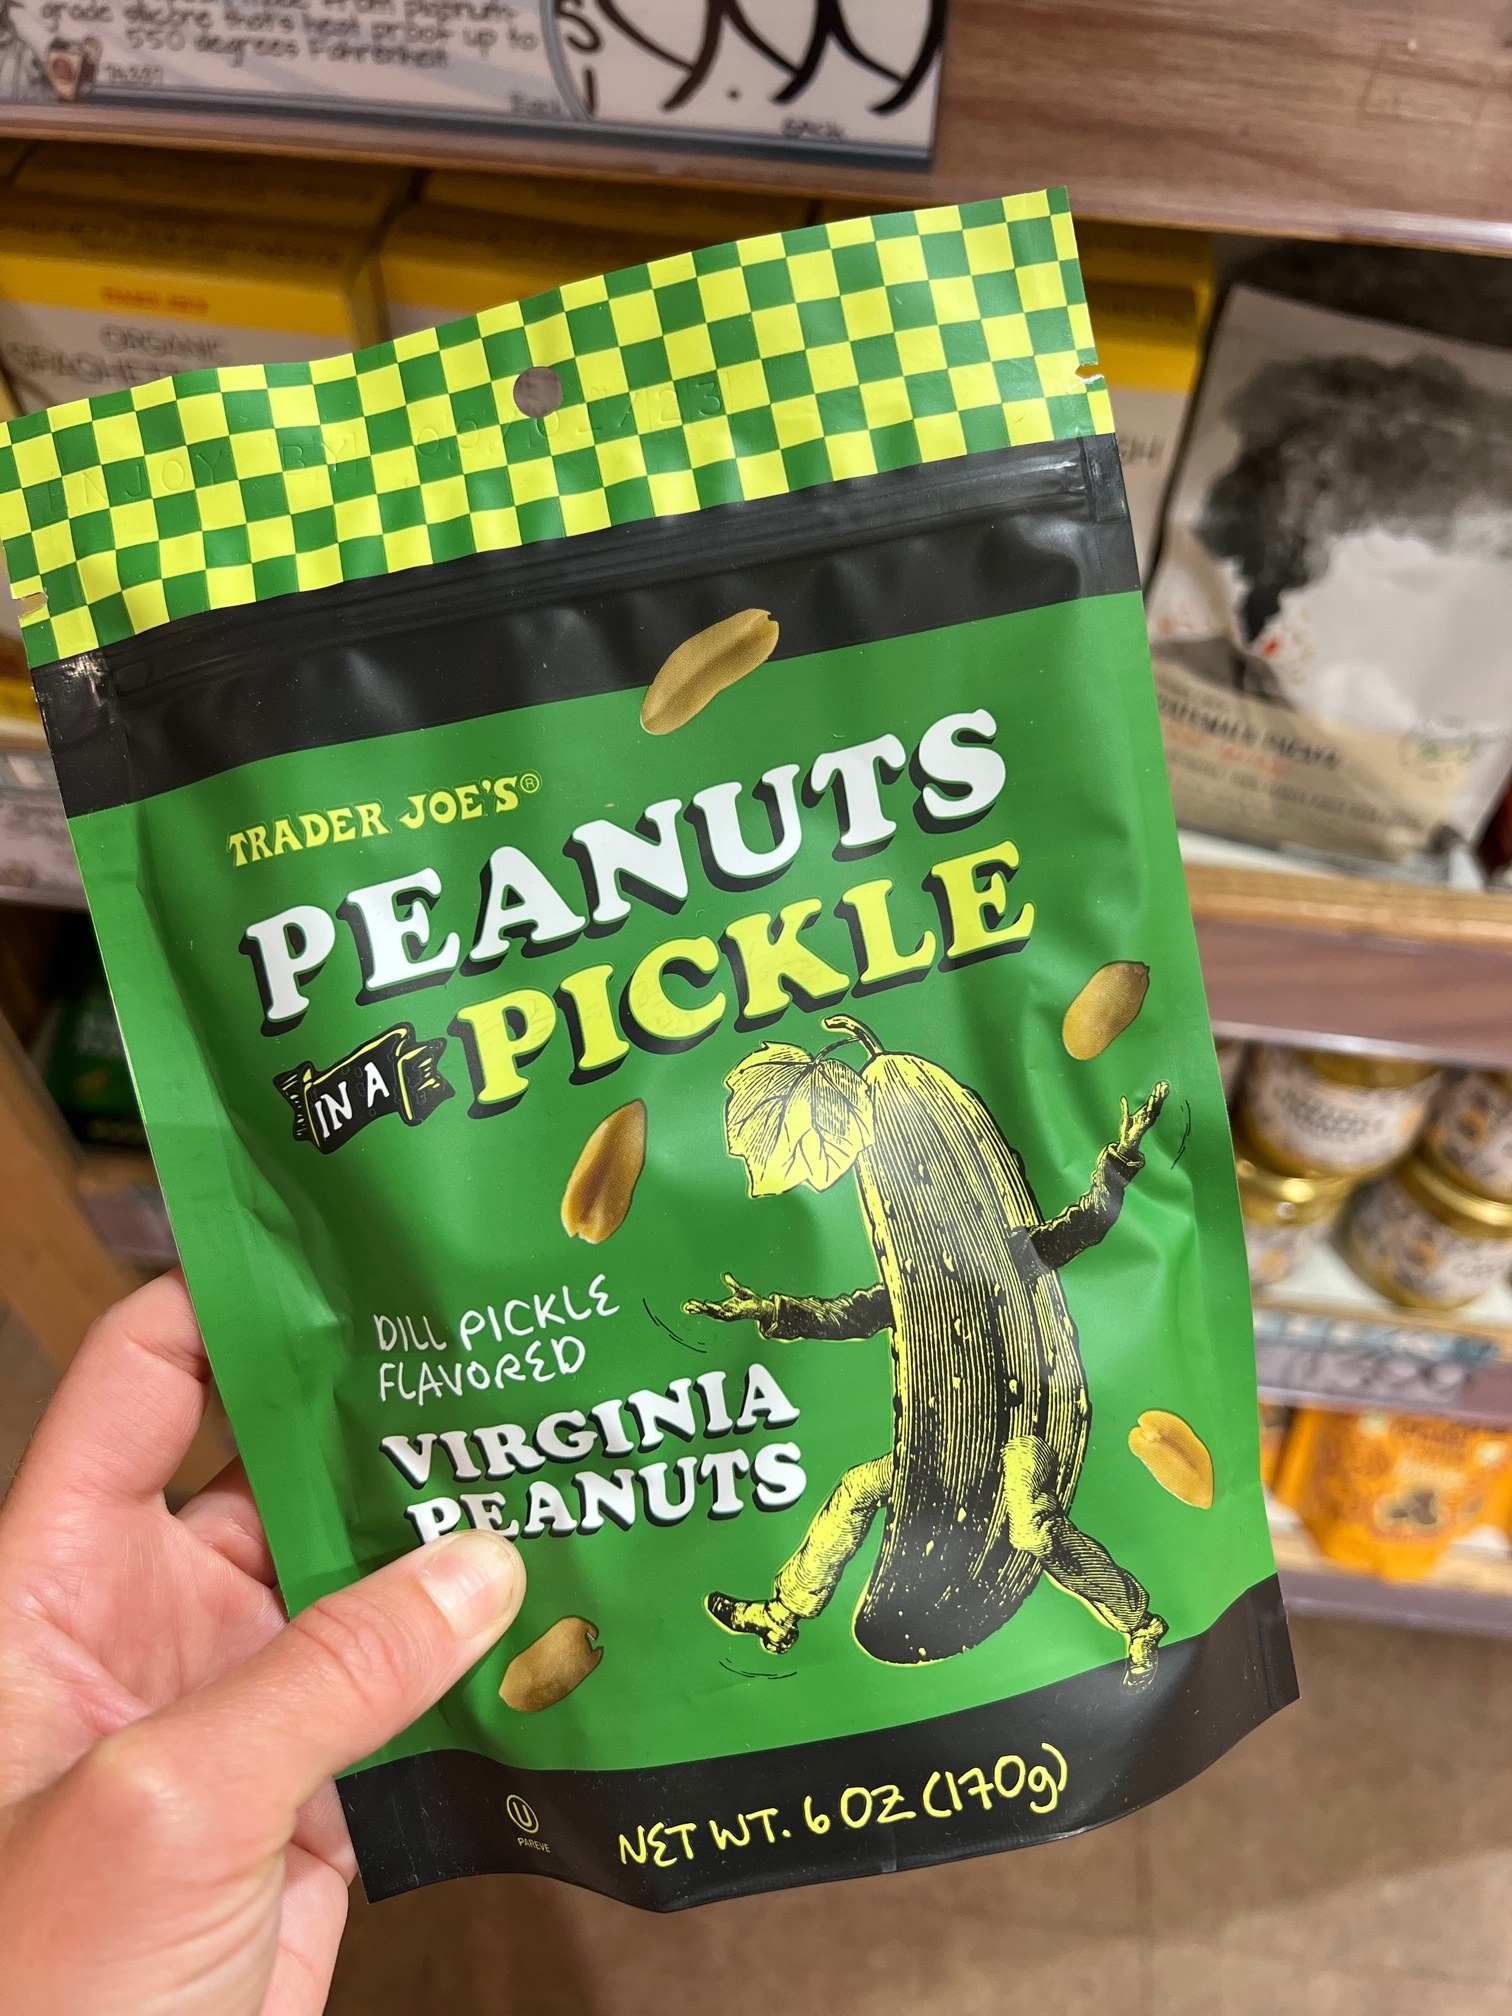 A bag of Peanuts in a Pickle